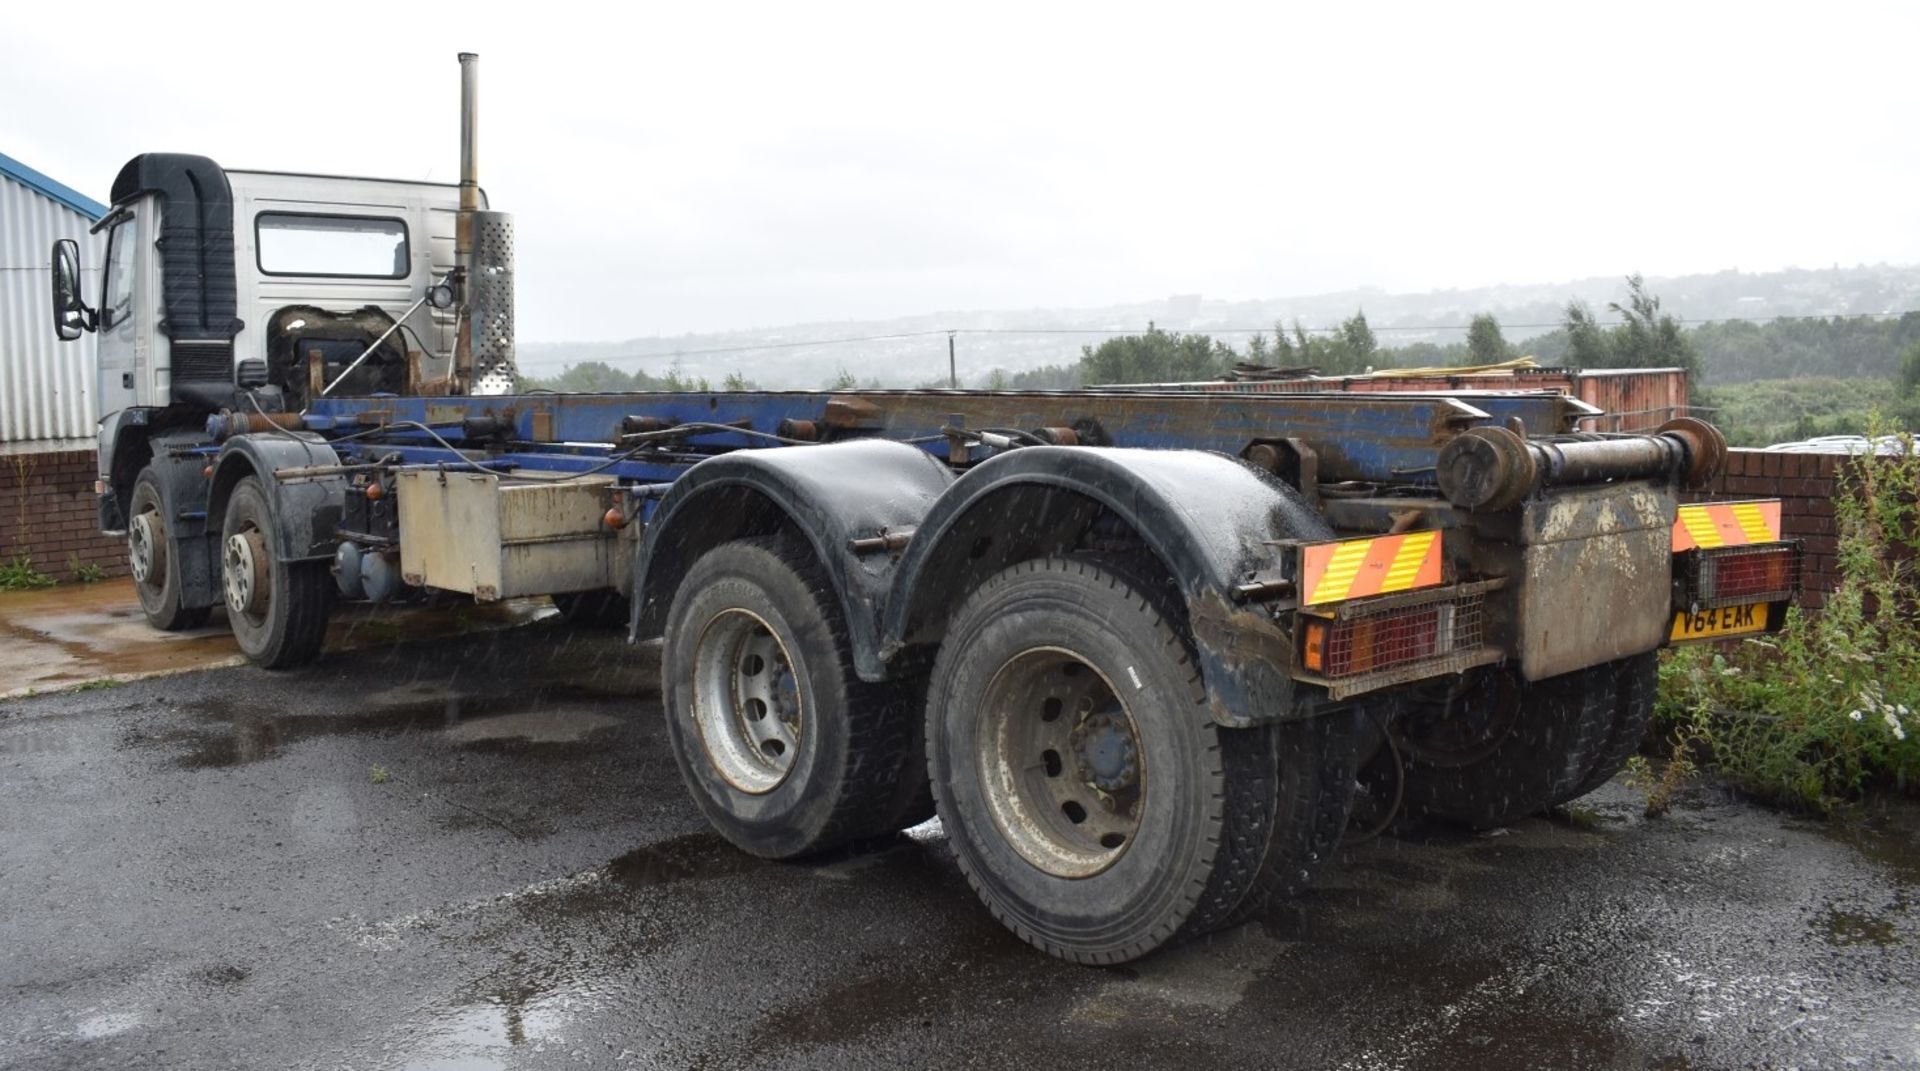 1 x Volvo 340 Plant Lorry With Tipper Chasis and Fitted Winch - CL547 - Location: South Yorkshire. - Image 12 of 25